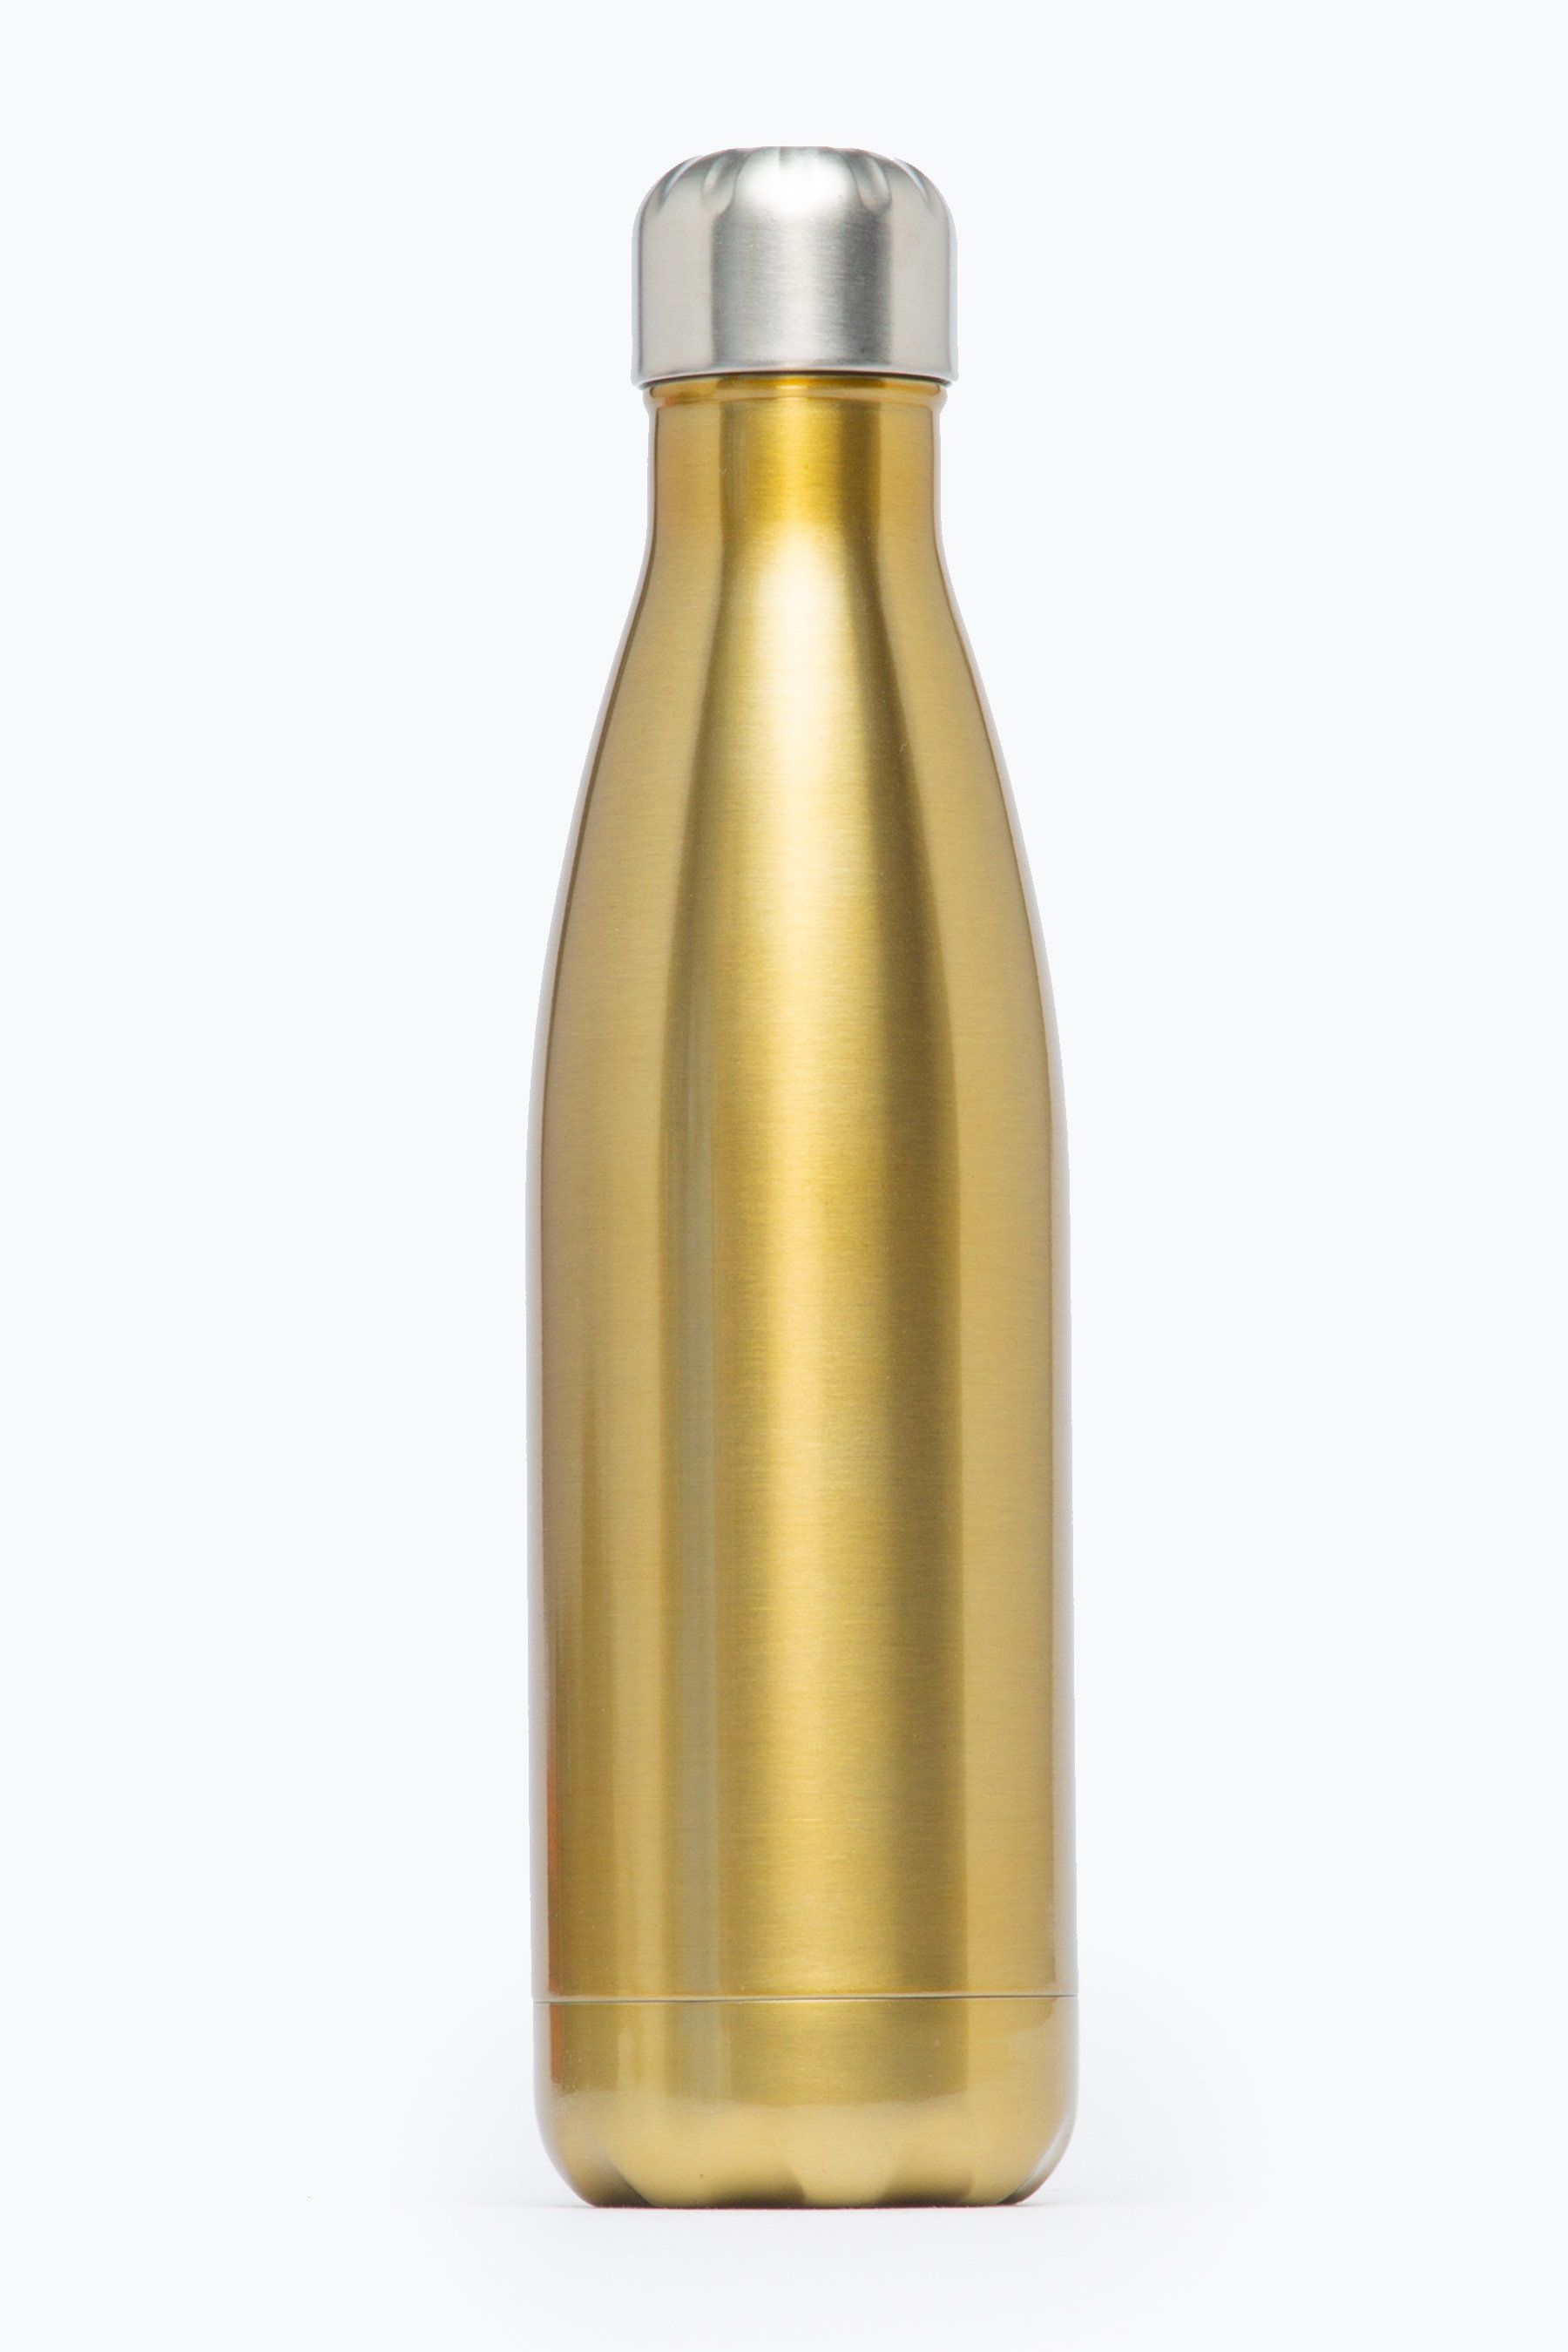 Keeping you hydrated, in style. Meet the HYPE. Gold Metal Reusable Water Bottle, perfect for when you're on the go. Designed in Aluminium to ensure your water stays ice-cold and for chillier days, keeping your oat milk latte warm for longer. Reuse it again and again with an airtight screw lid prevents spills. Why not grab one of our lunch bags or backpacks with a bottle holder to complete the look. Hand wash only.